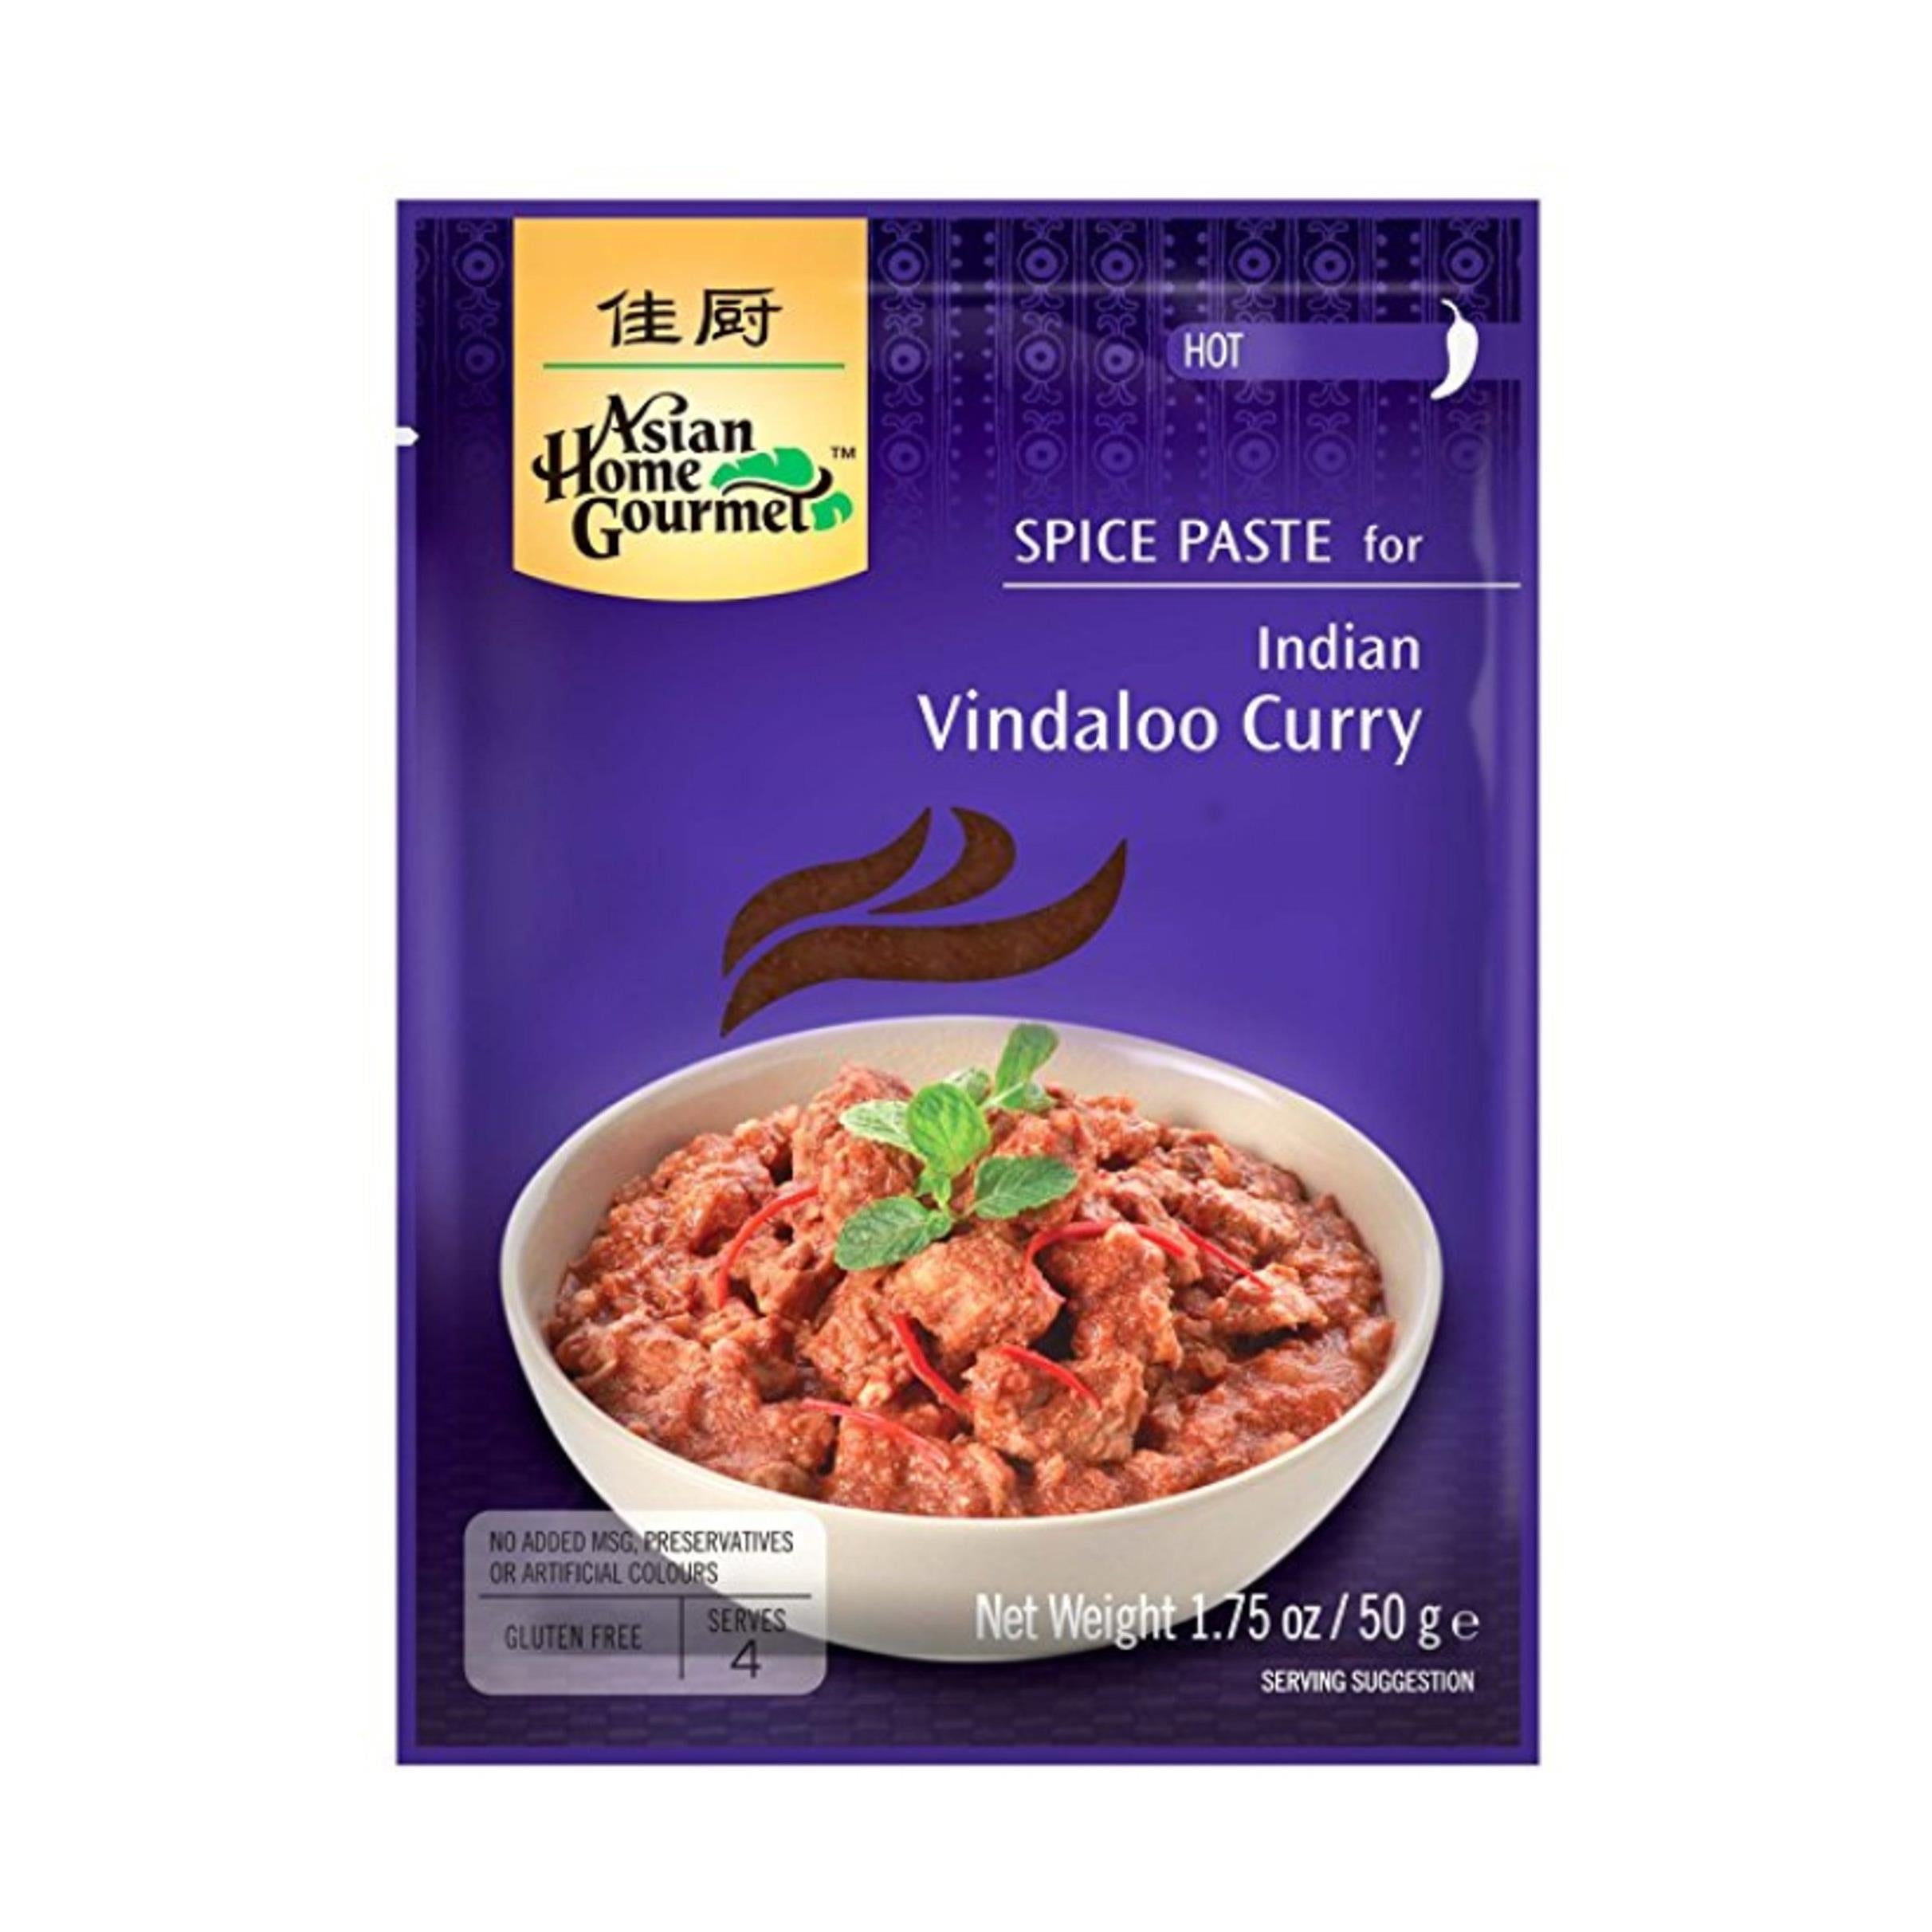 Asian Home Gourmet Spice Paste for Indian Vindaloo Curry, 1.75 oz, 3 packs